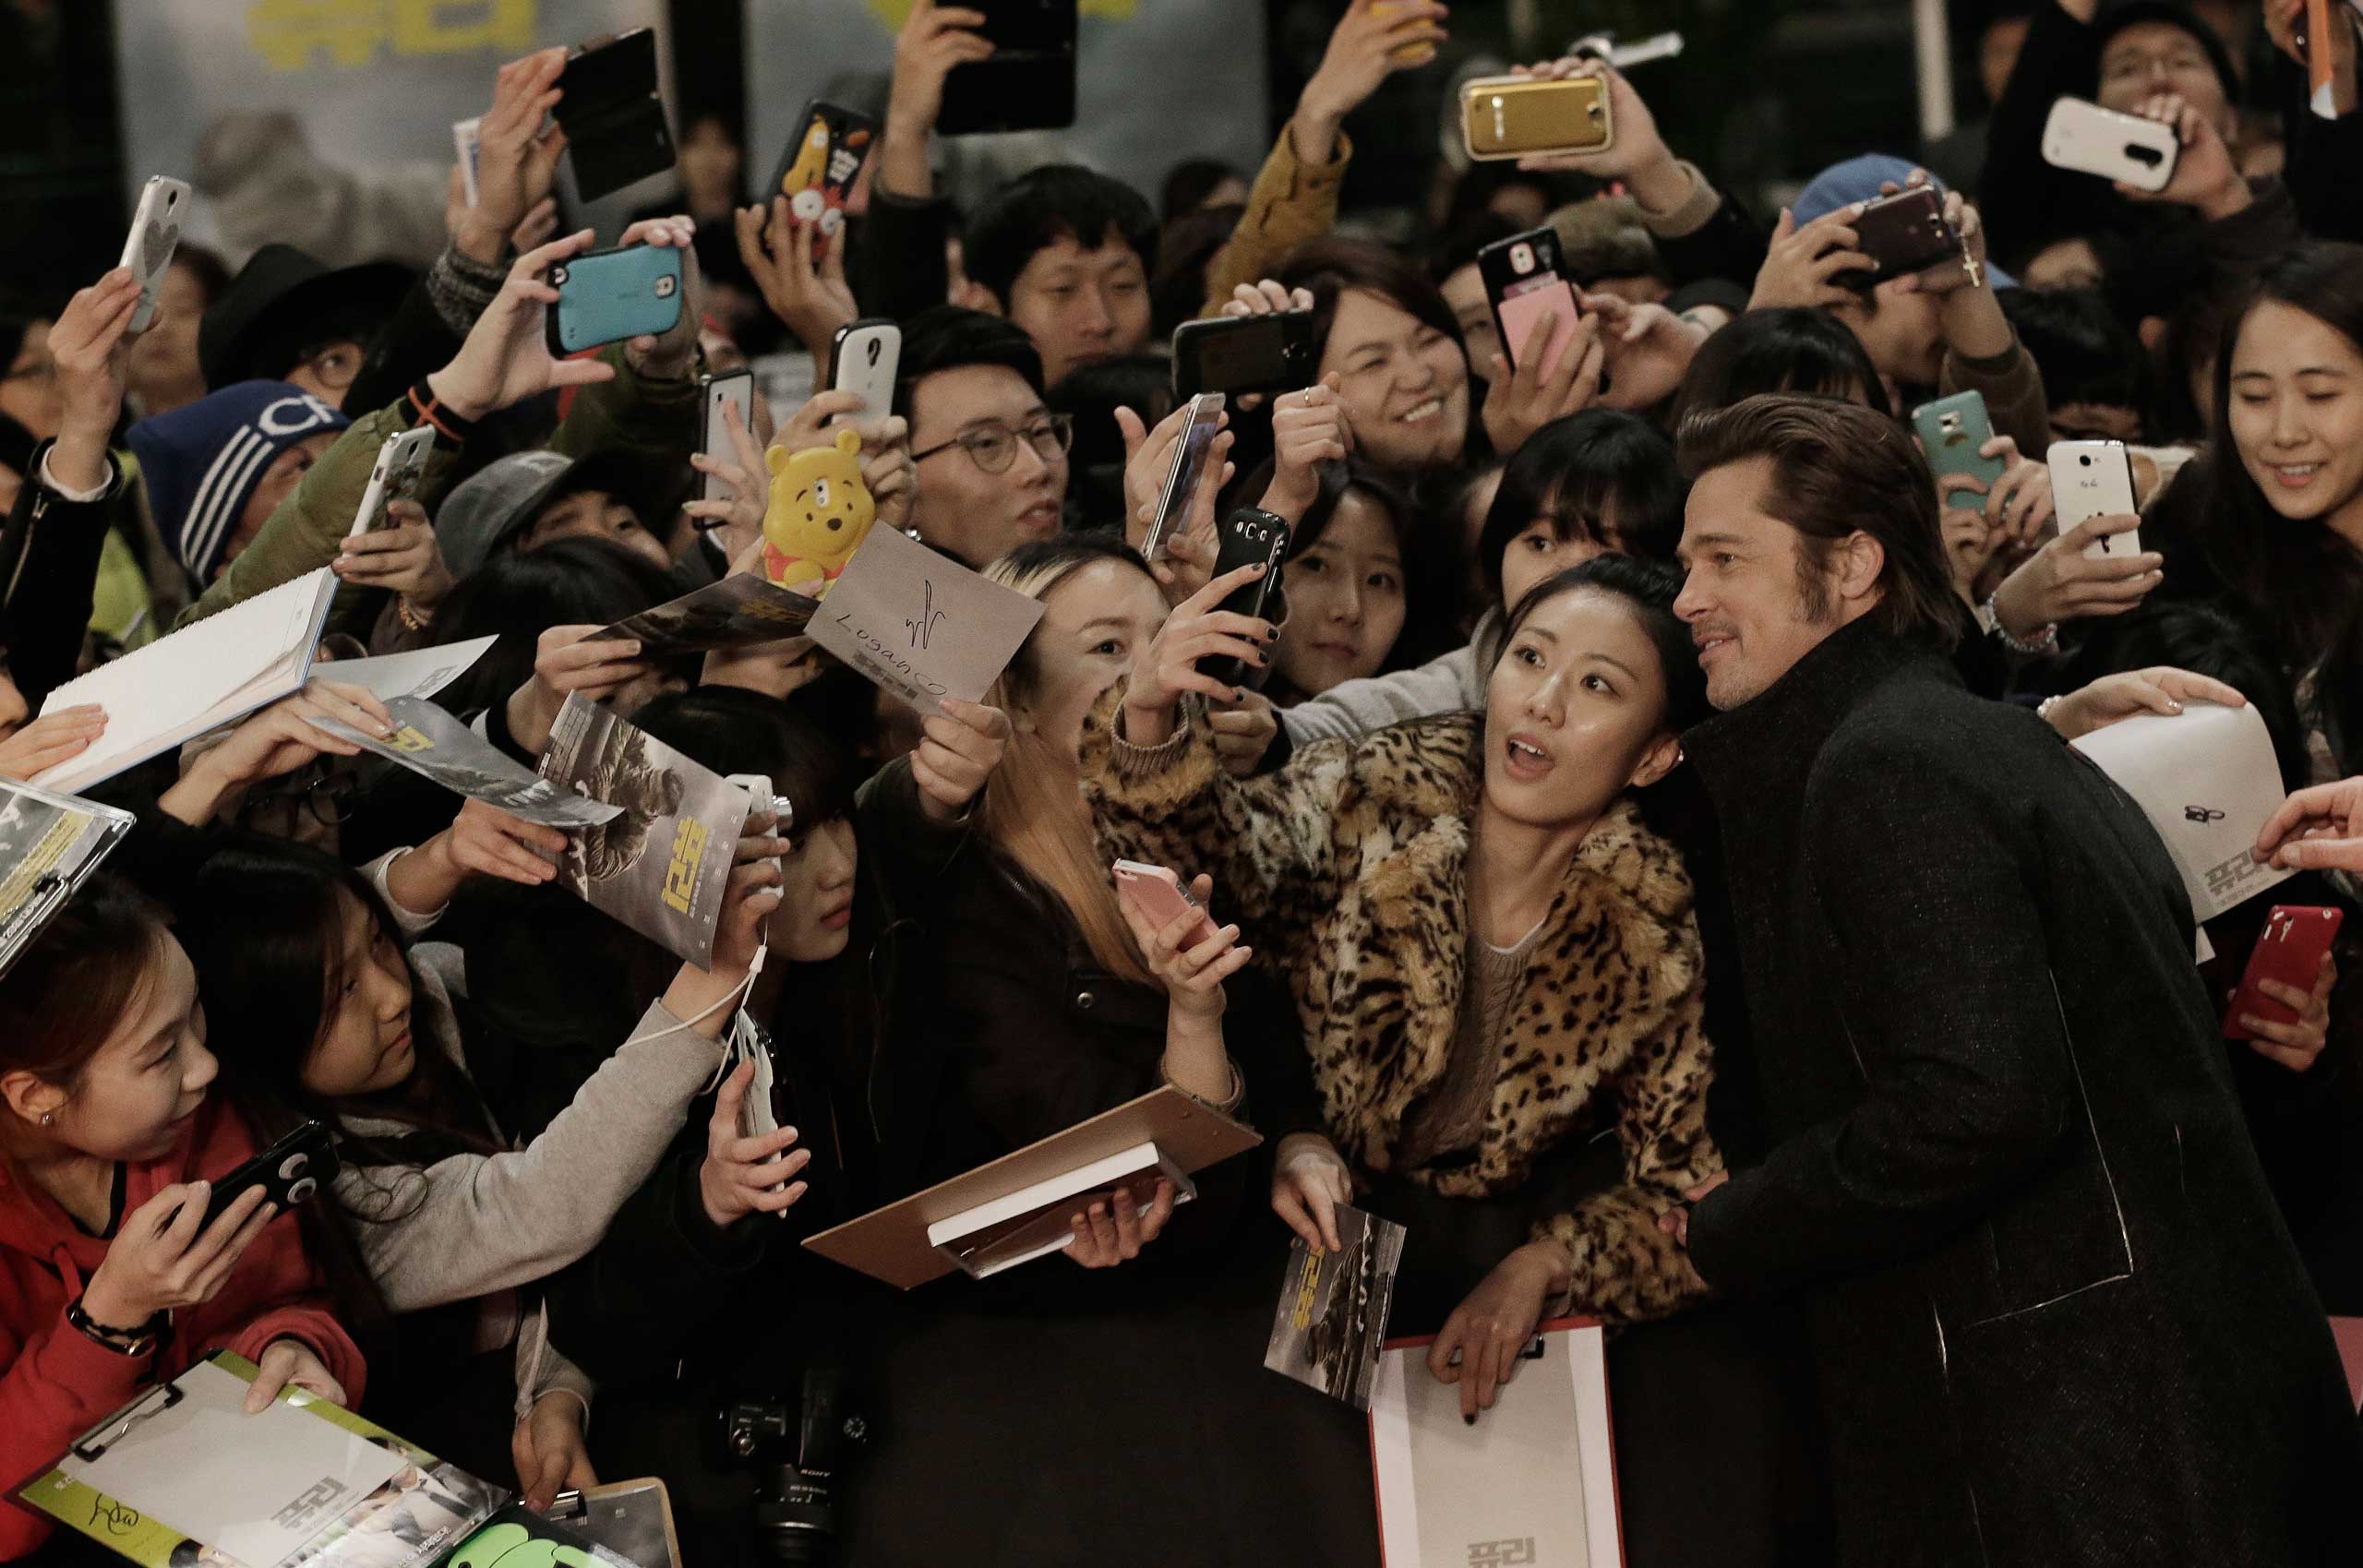 Nov. 13, 2014. Actor Brad Pitt takes pictures with fans during a promotional event for his latest film Fury in Seoul. The movie is to be released in South Korea on Nov. 20.